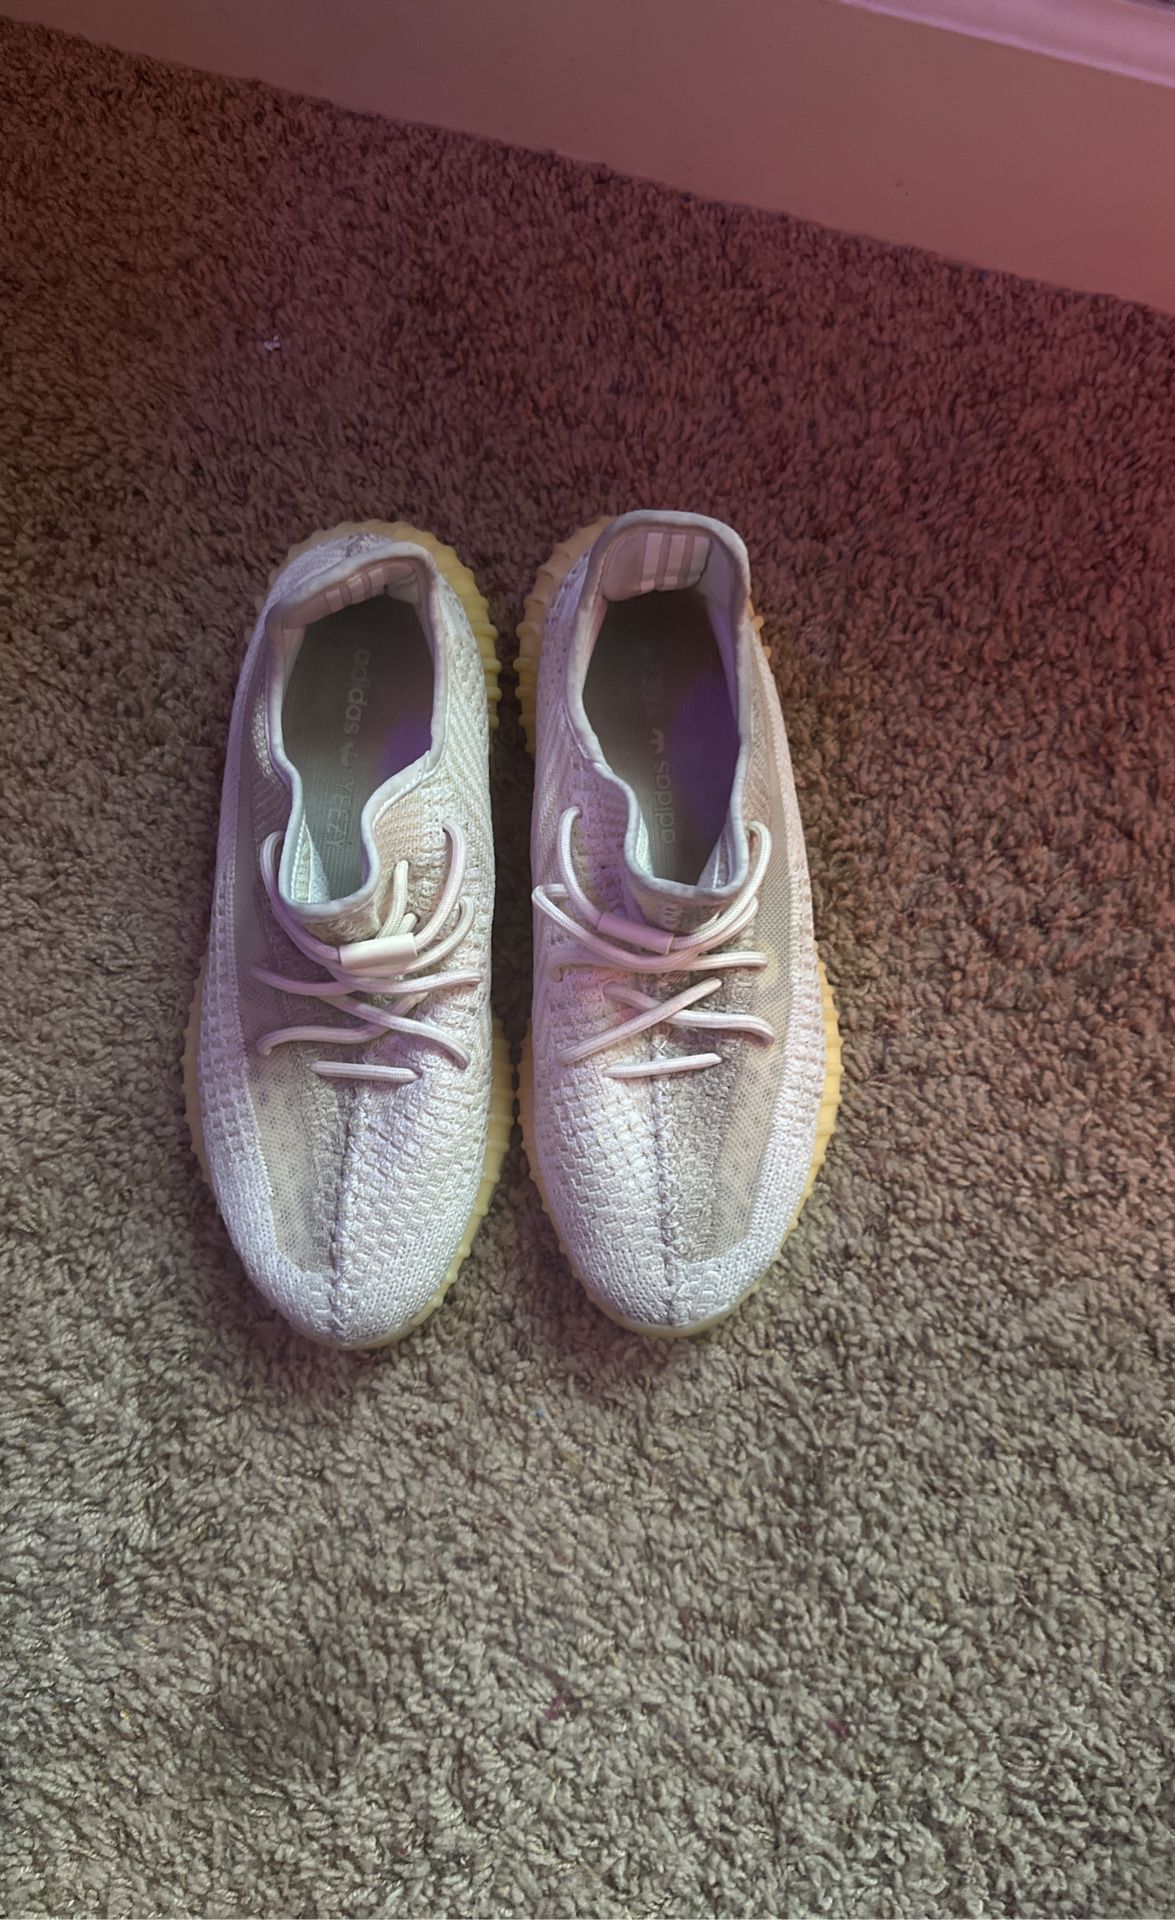 Yeezy Boost 350 “Natural”